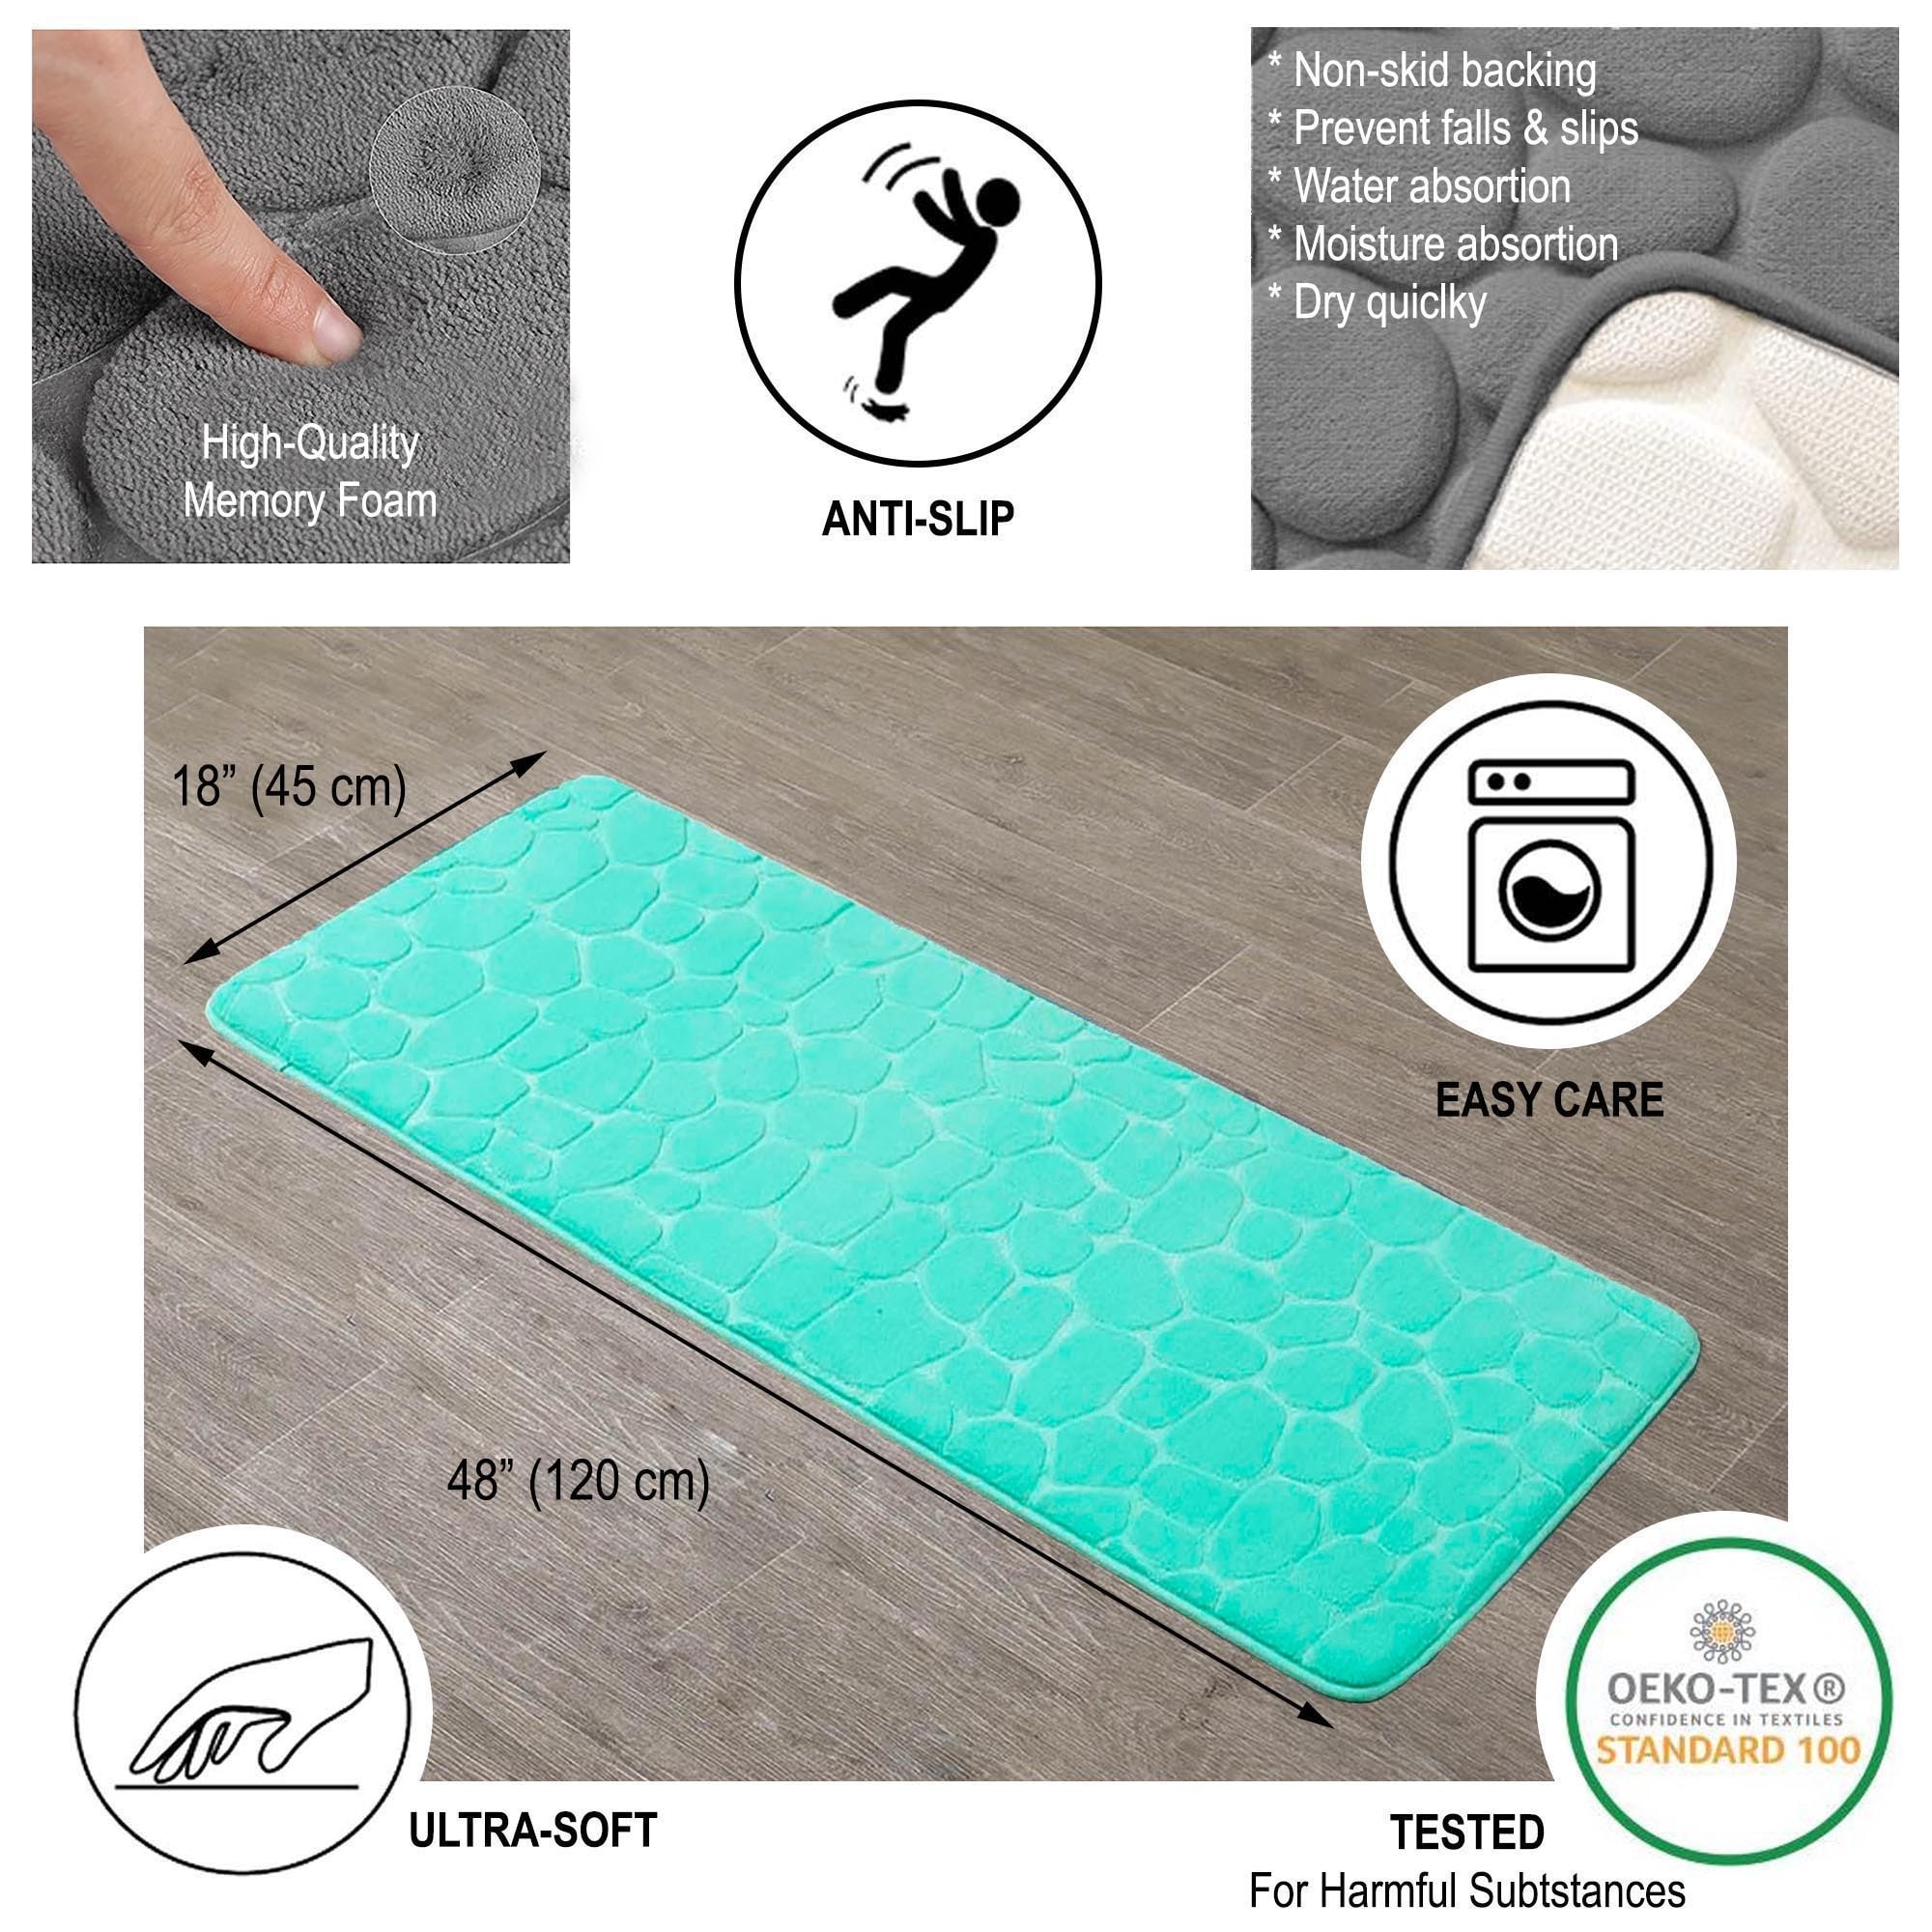 I upgraded to a memory foam bath mat — and it's like stepping on a